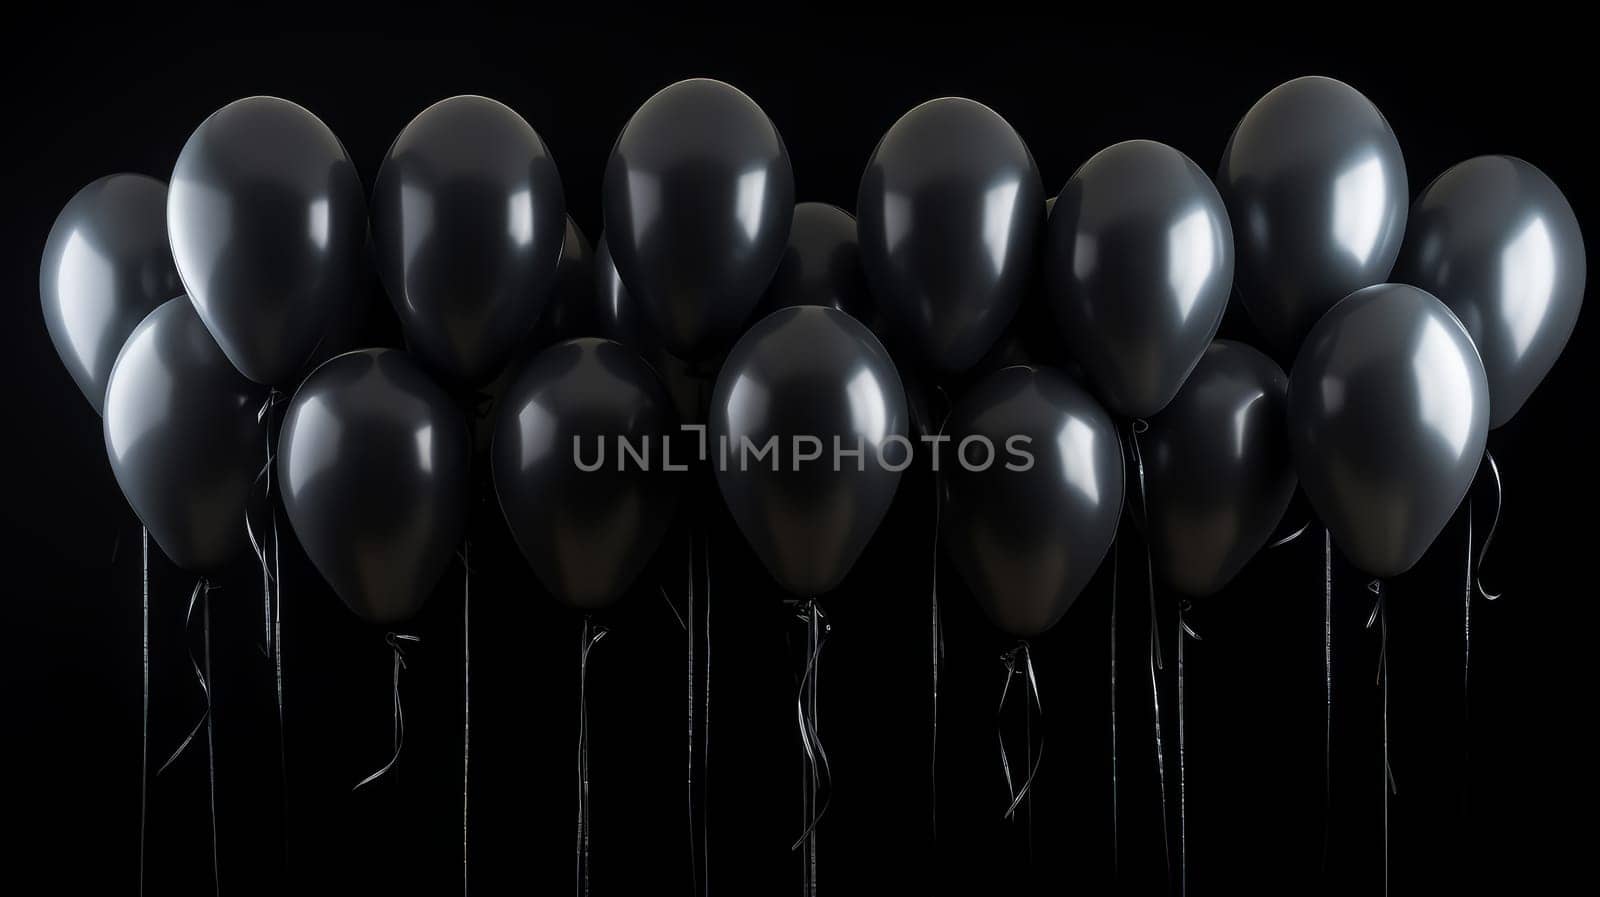 Black balloons on dark background on the day of sales black Friday.